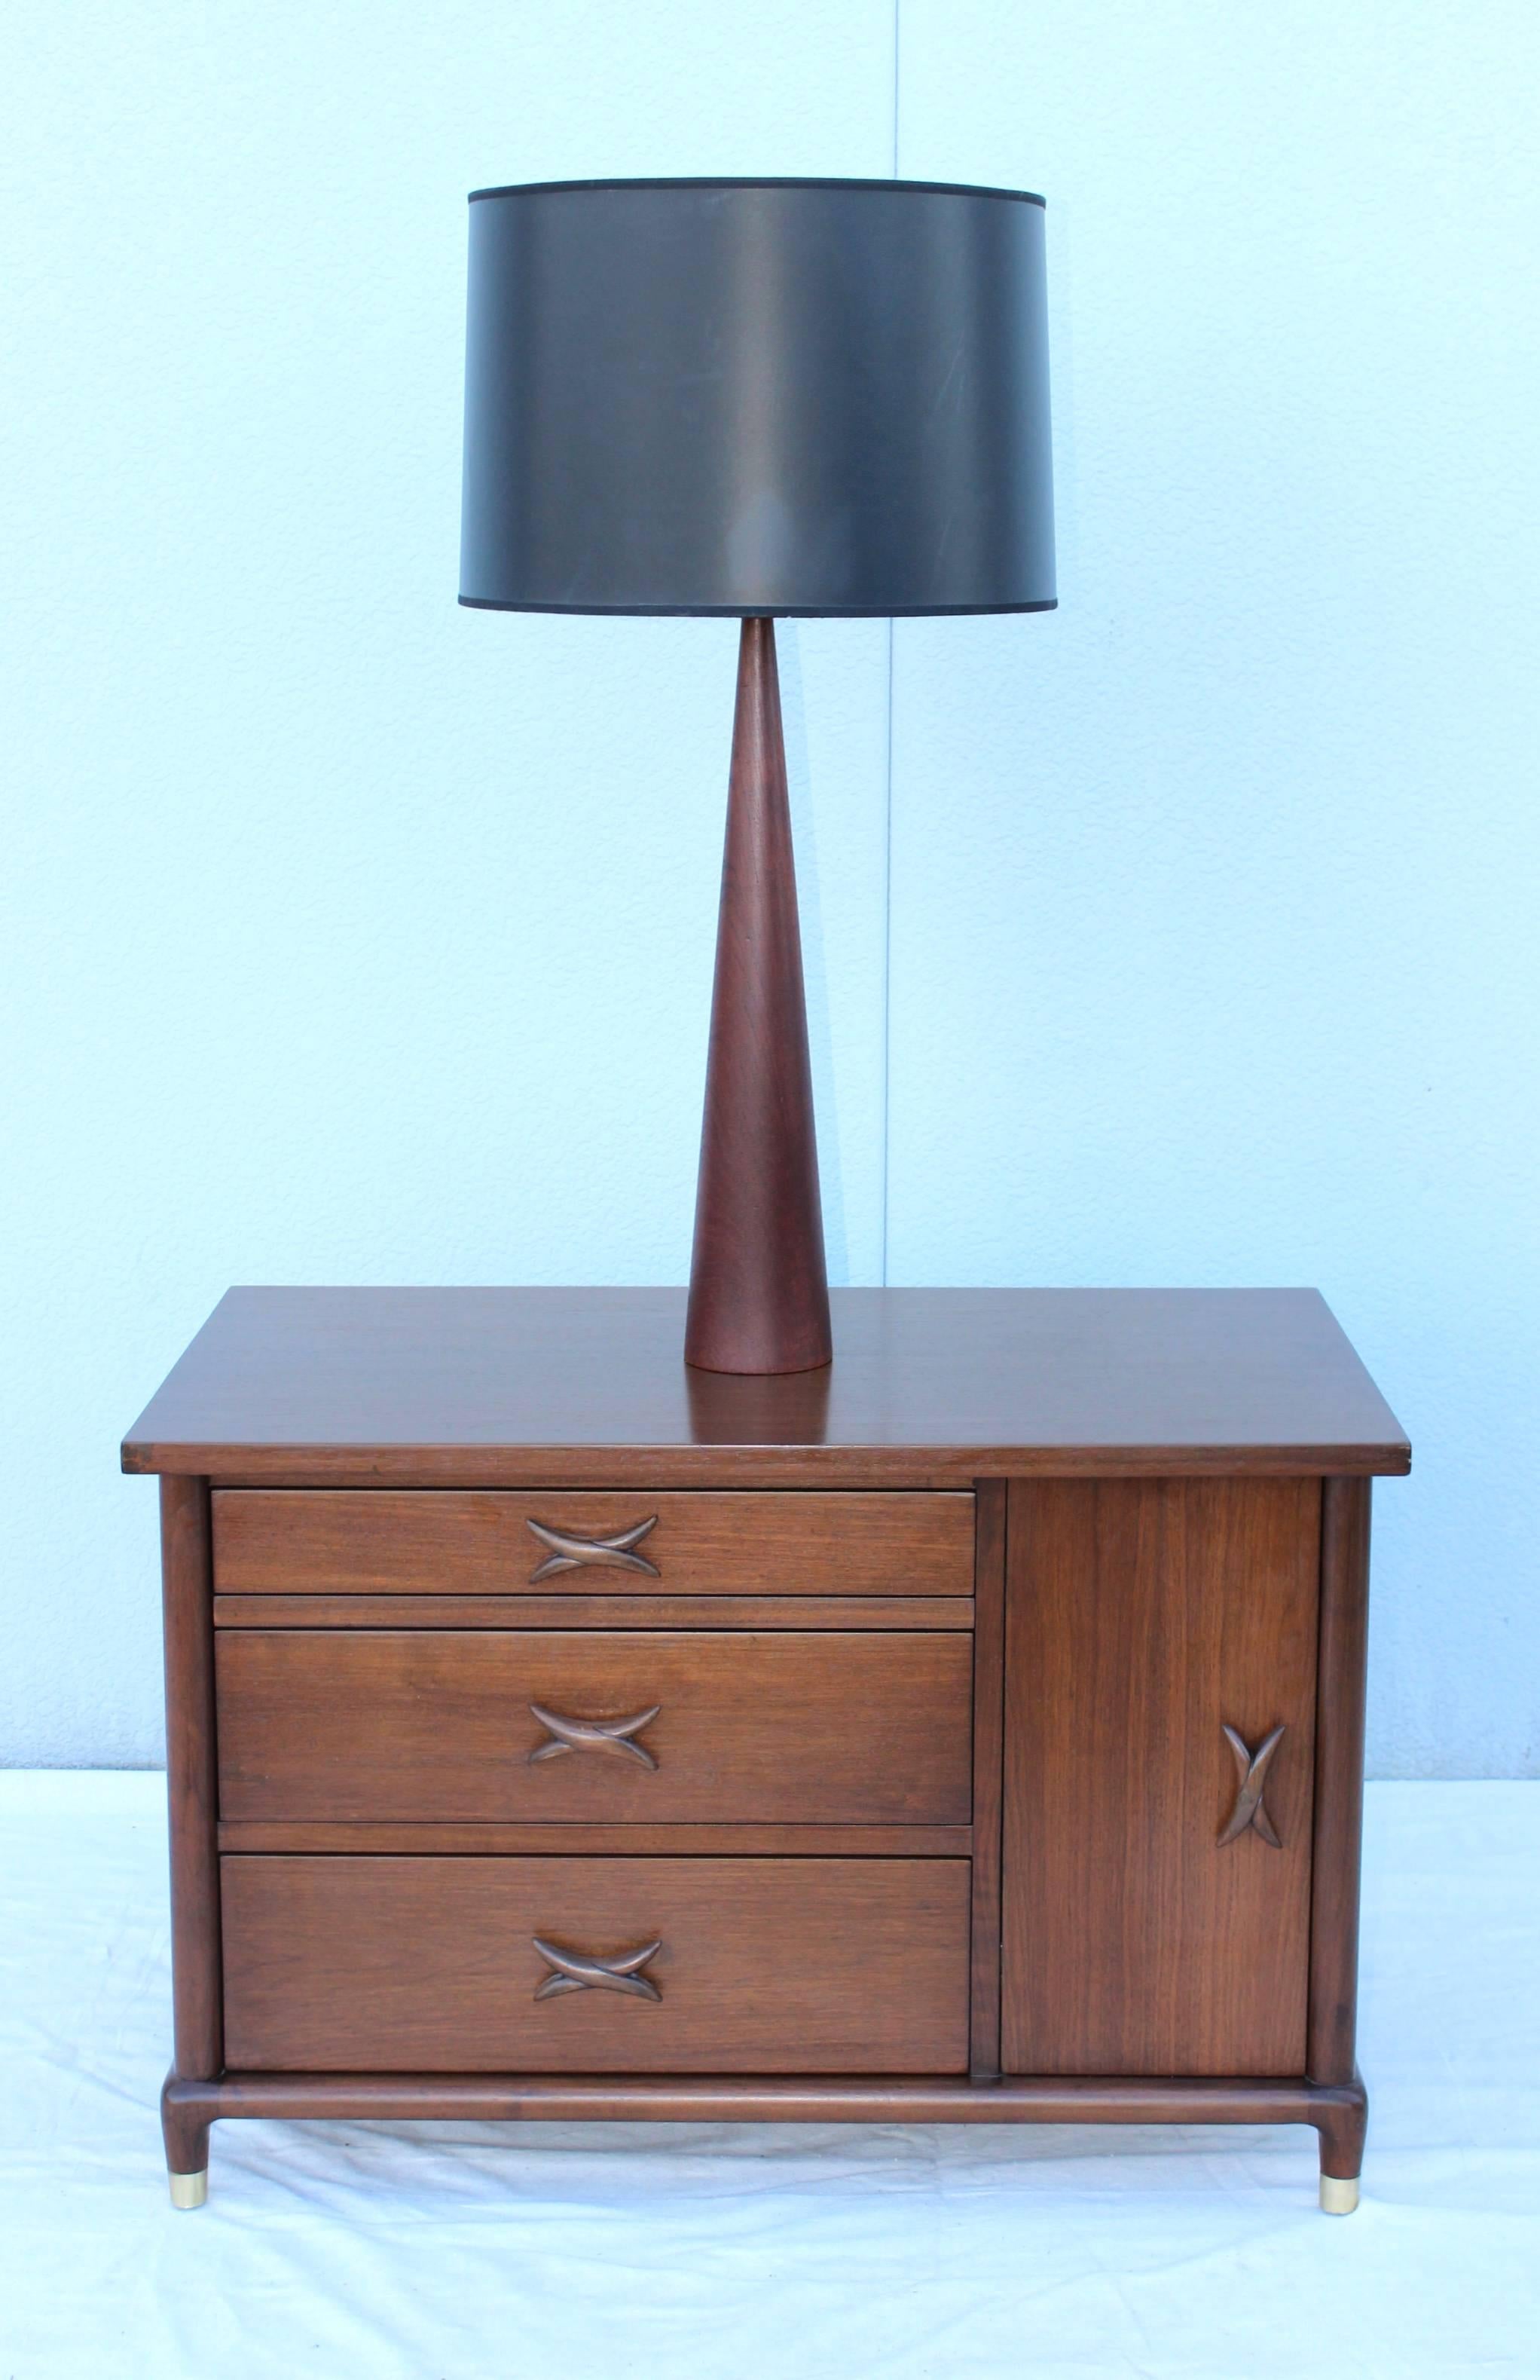 1950s solid teak modern table lamp by Ernst Henriksen. 

Height to light socket 26.''

Shade for photography only.